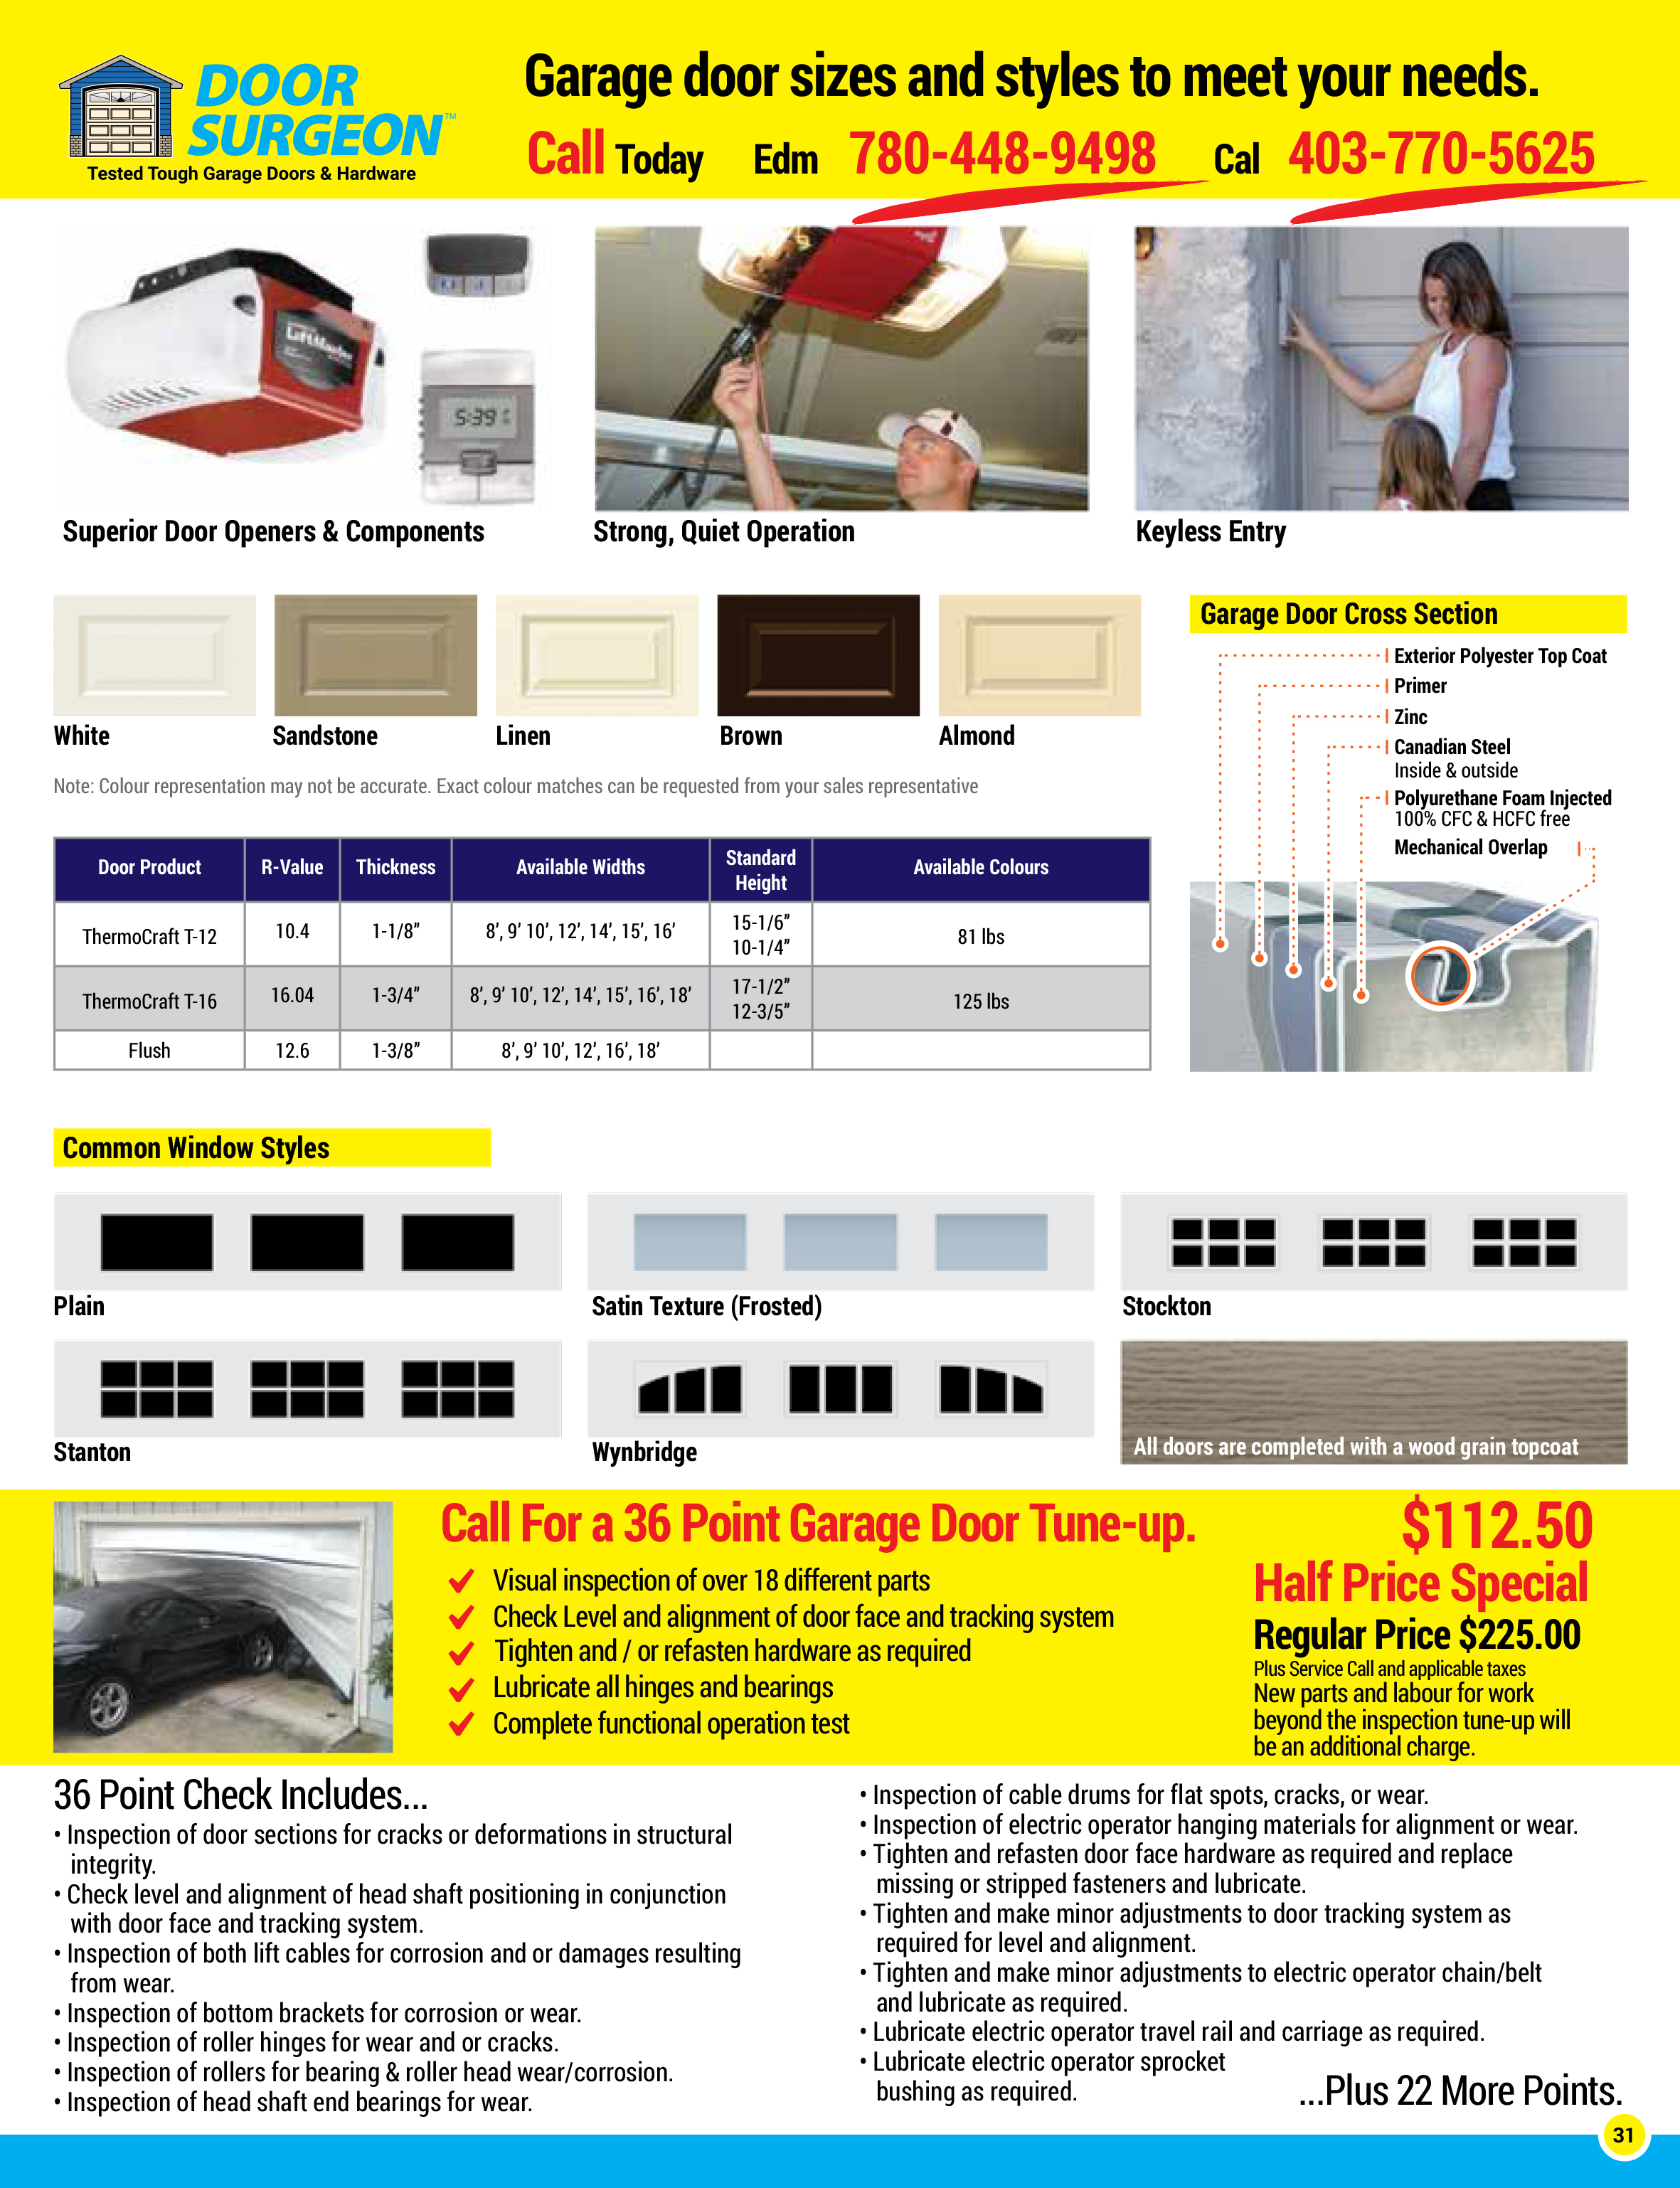 Door Surgeon supply install quality garage door openers, components, and keyless entry units.